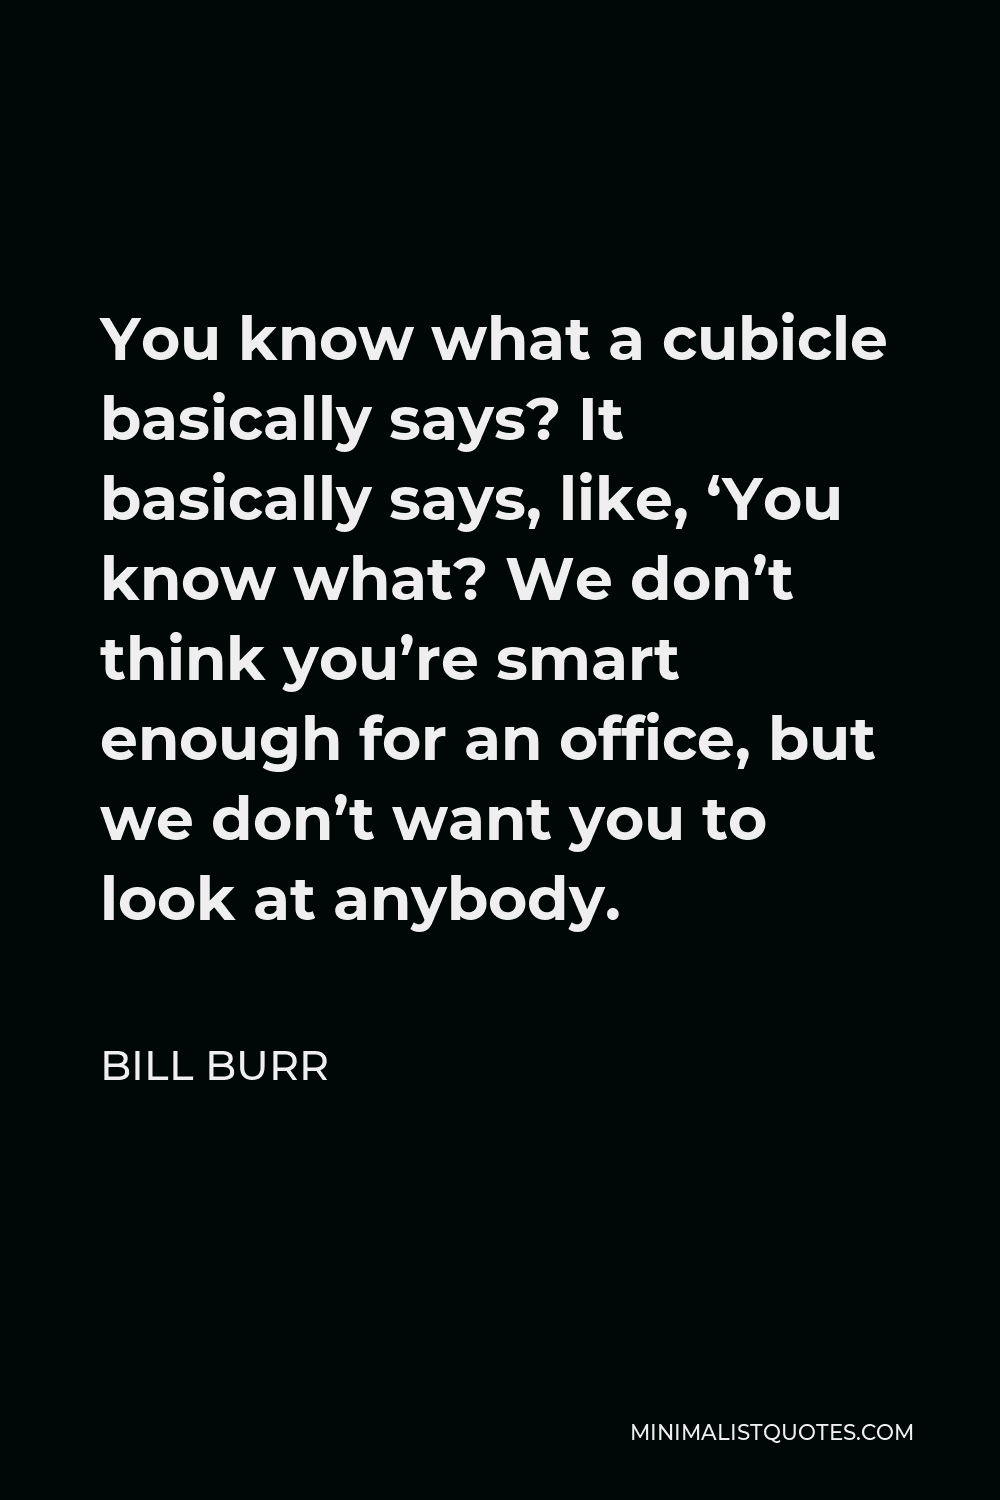 Bill Burr Quote - You know what a cubicle basically says? It basically says, like, ‘You know what? We don’t think you’re smart enough for an office, but we don’t want you to look at anybody.